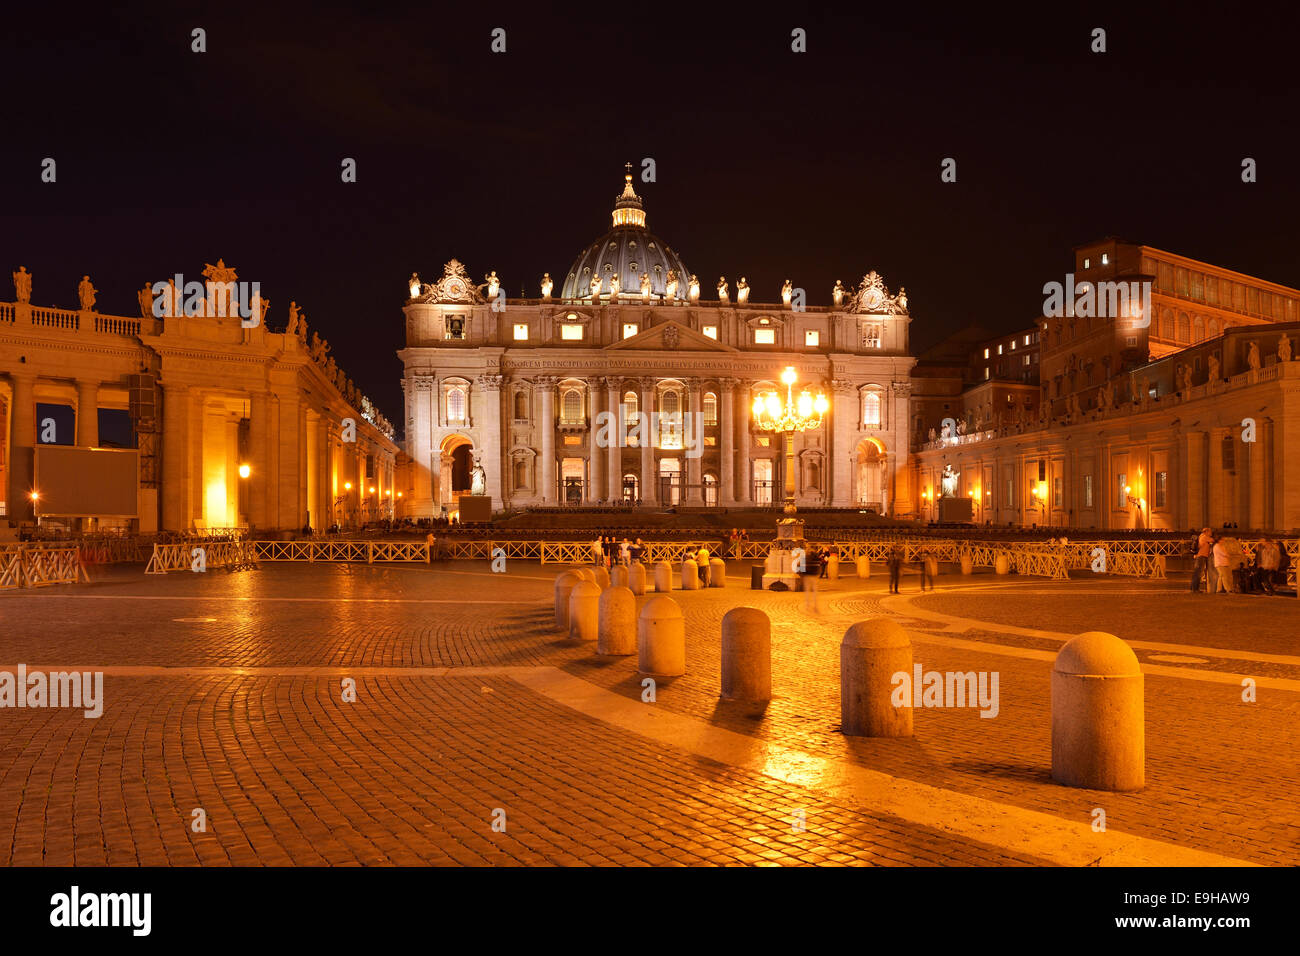 St. Peter's Basilica, St. Peter's Square, Vatican City, Vatican, Rome, Italy Stock Photo